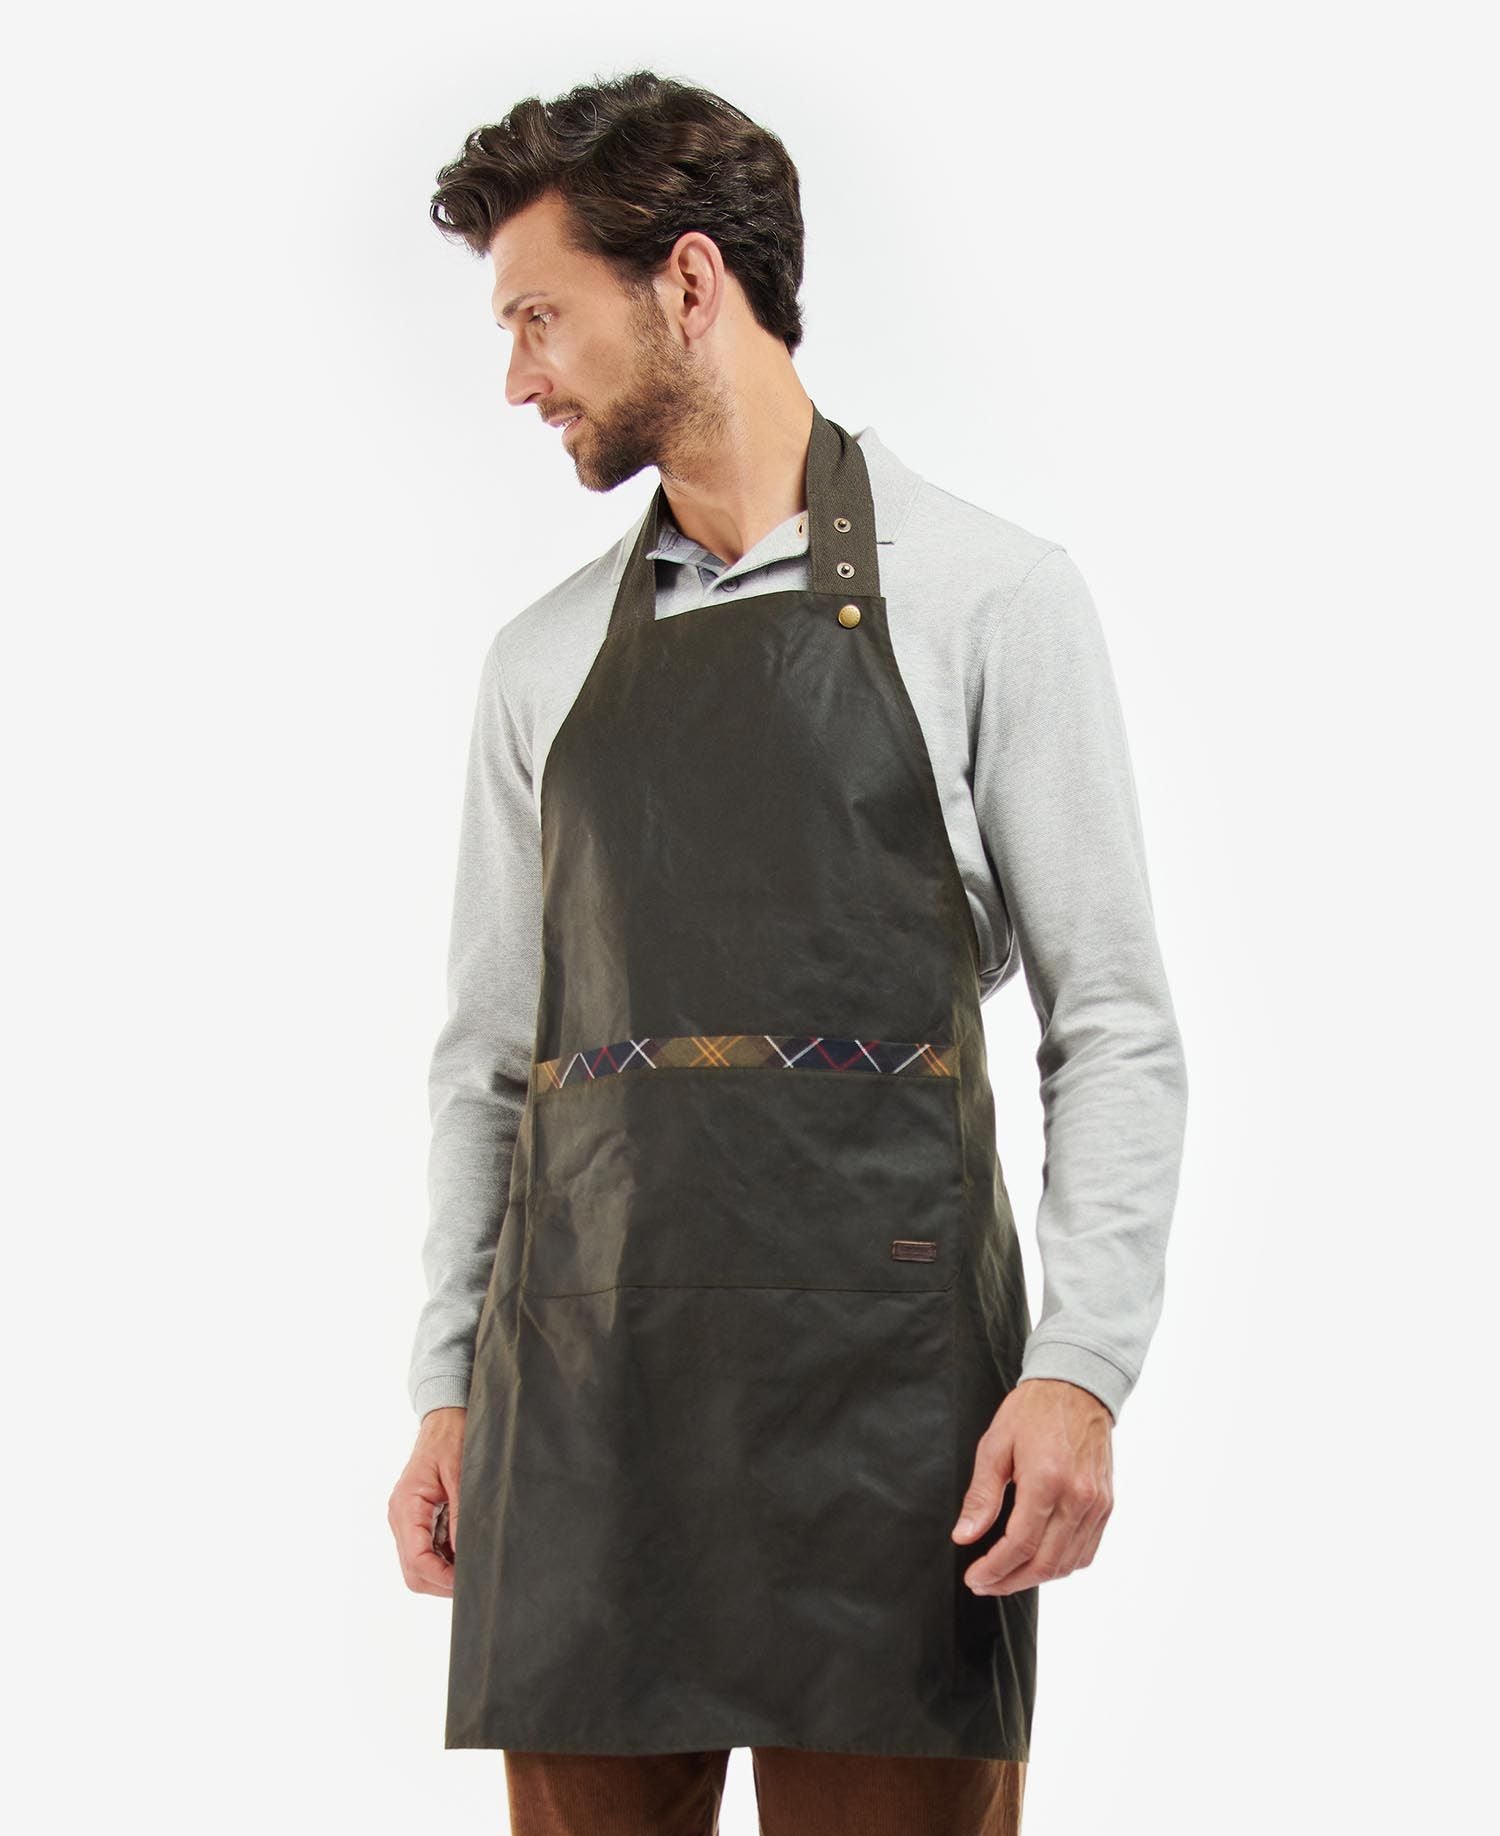 Barbour Wax For Life Apron UAC0263OL71